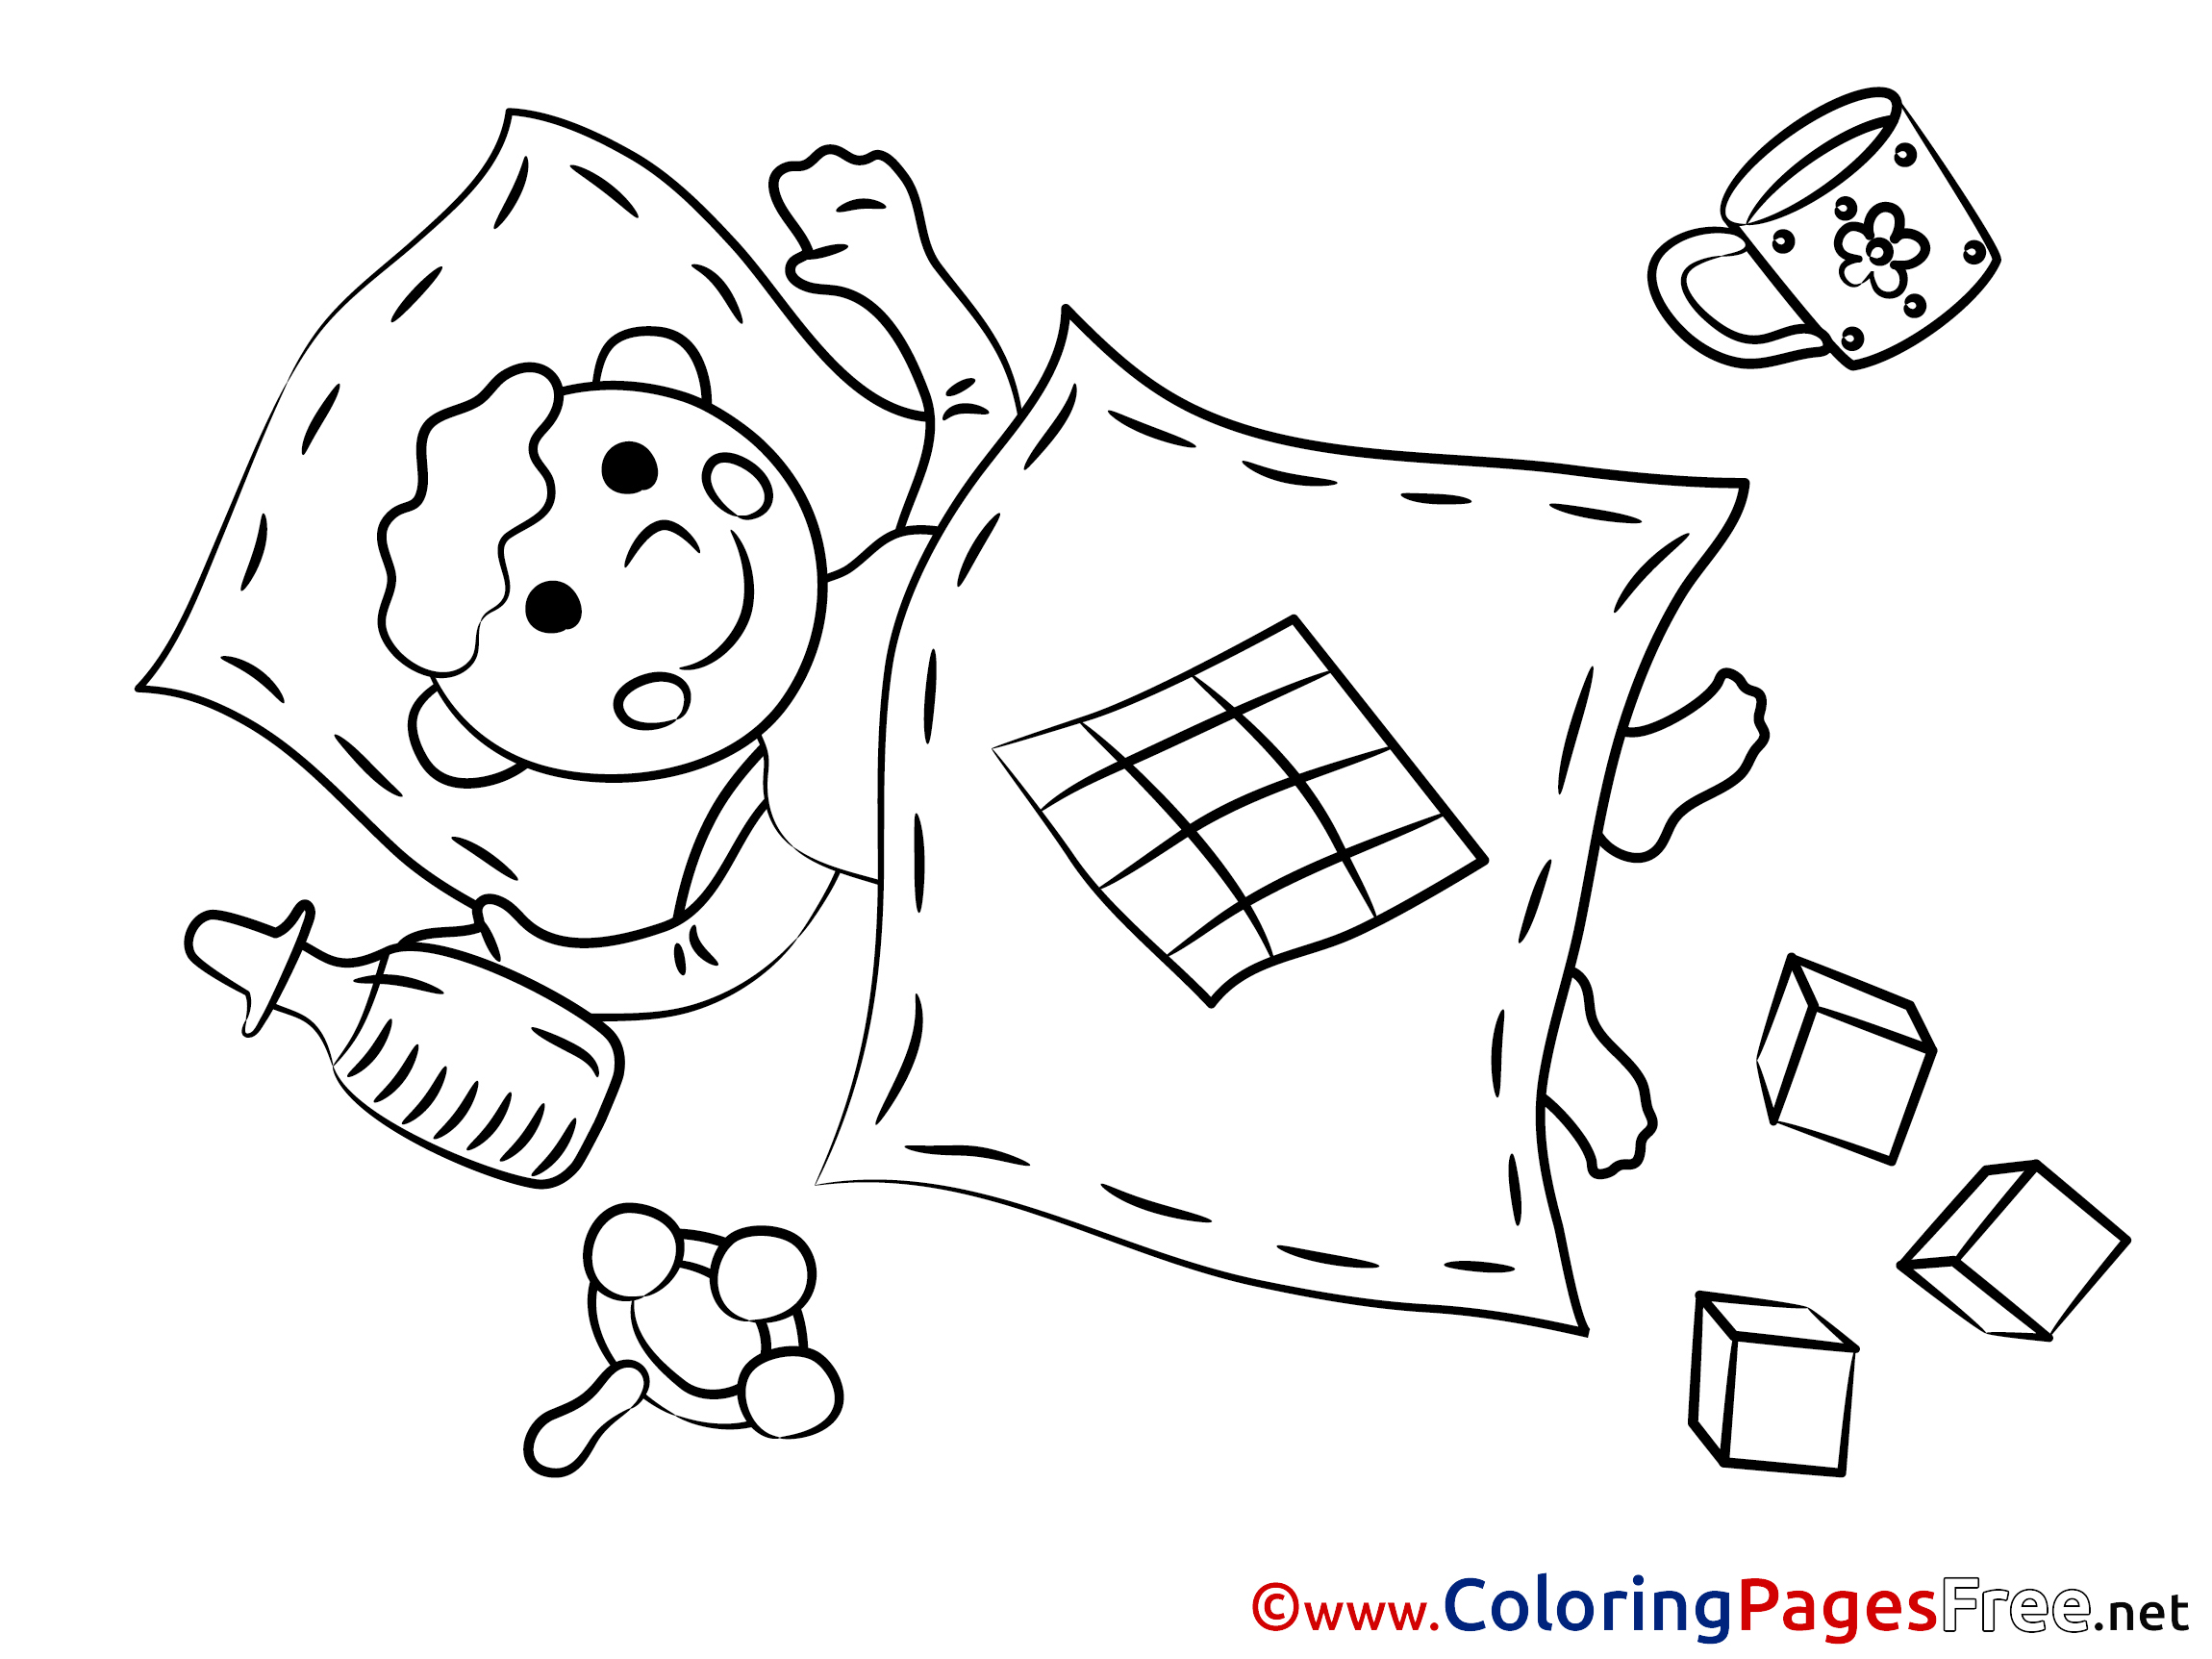 Blanket printable Coloring Pages for free